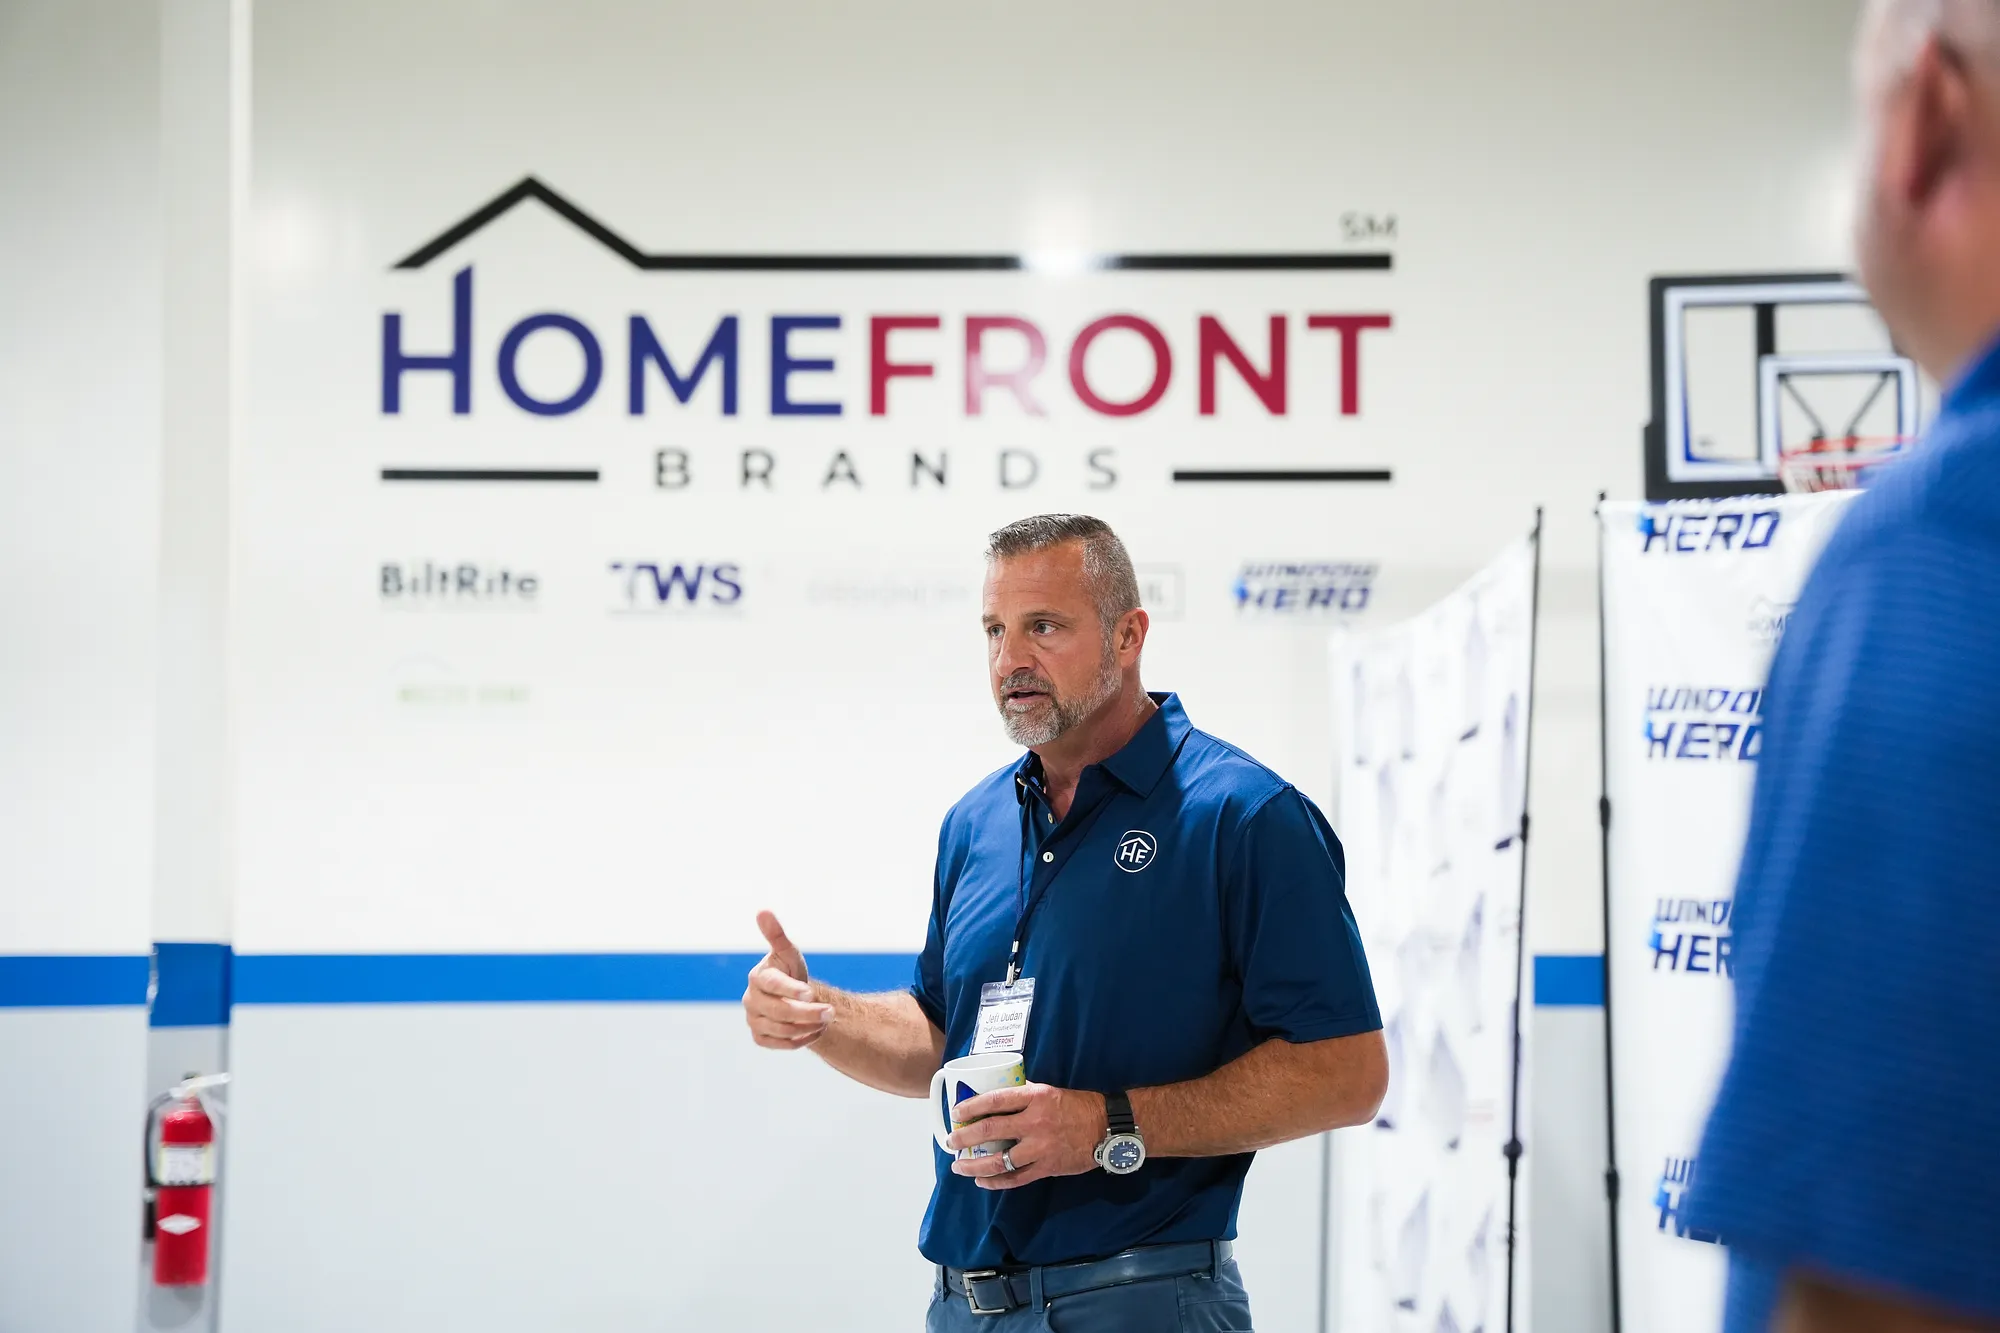 Leading From The C-Suite: Jeff Dudan of HomeFront Brands On Five Things You Need To Be A Highly Effective C-Suite Executive